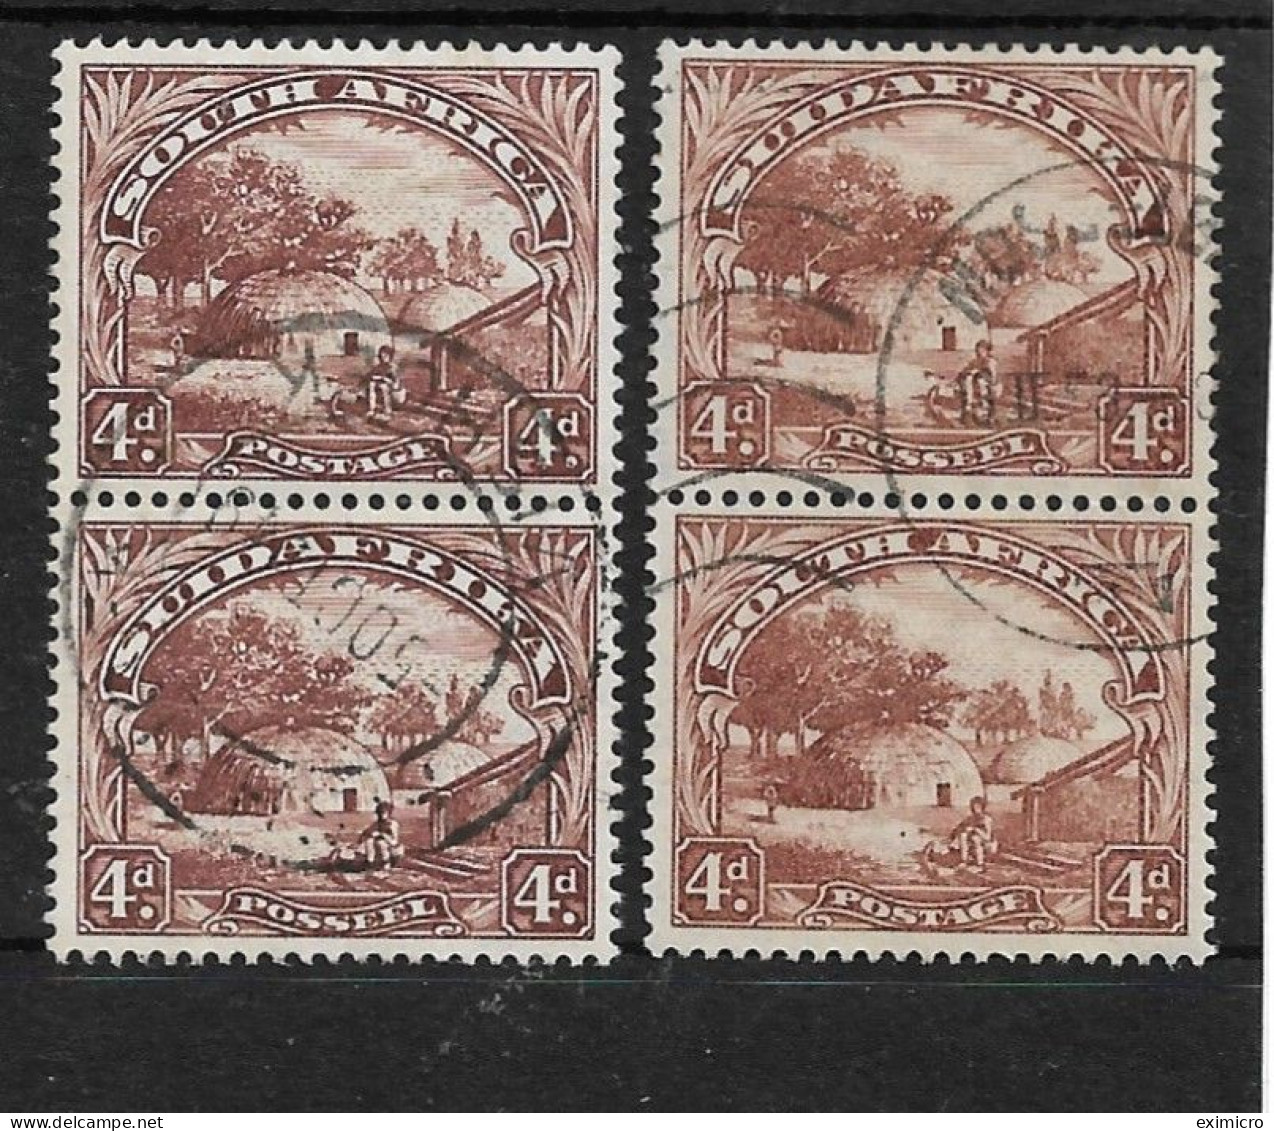 SOUTH AFRICA 1936 4d X 2 VERTICAL PAIRS (SHADES) SG 46c X 2 FINE USED - Used Stamps